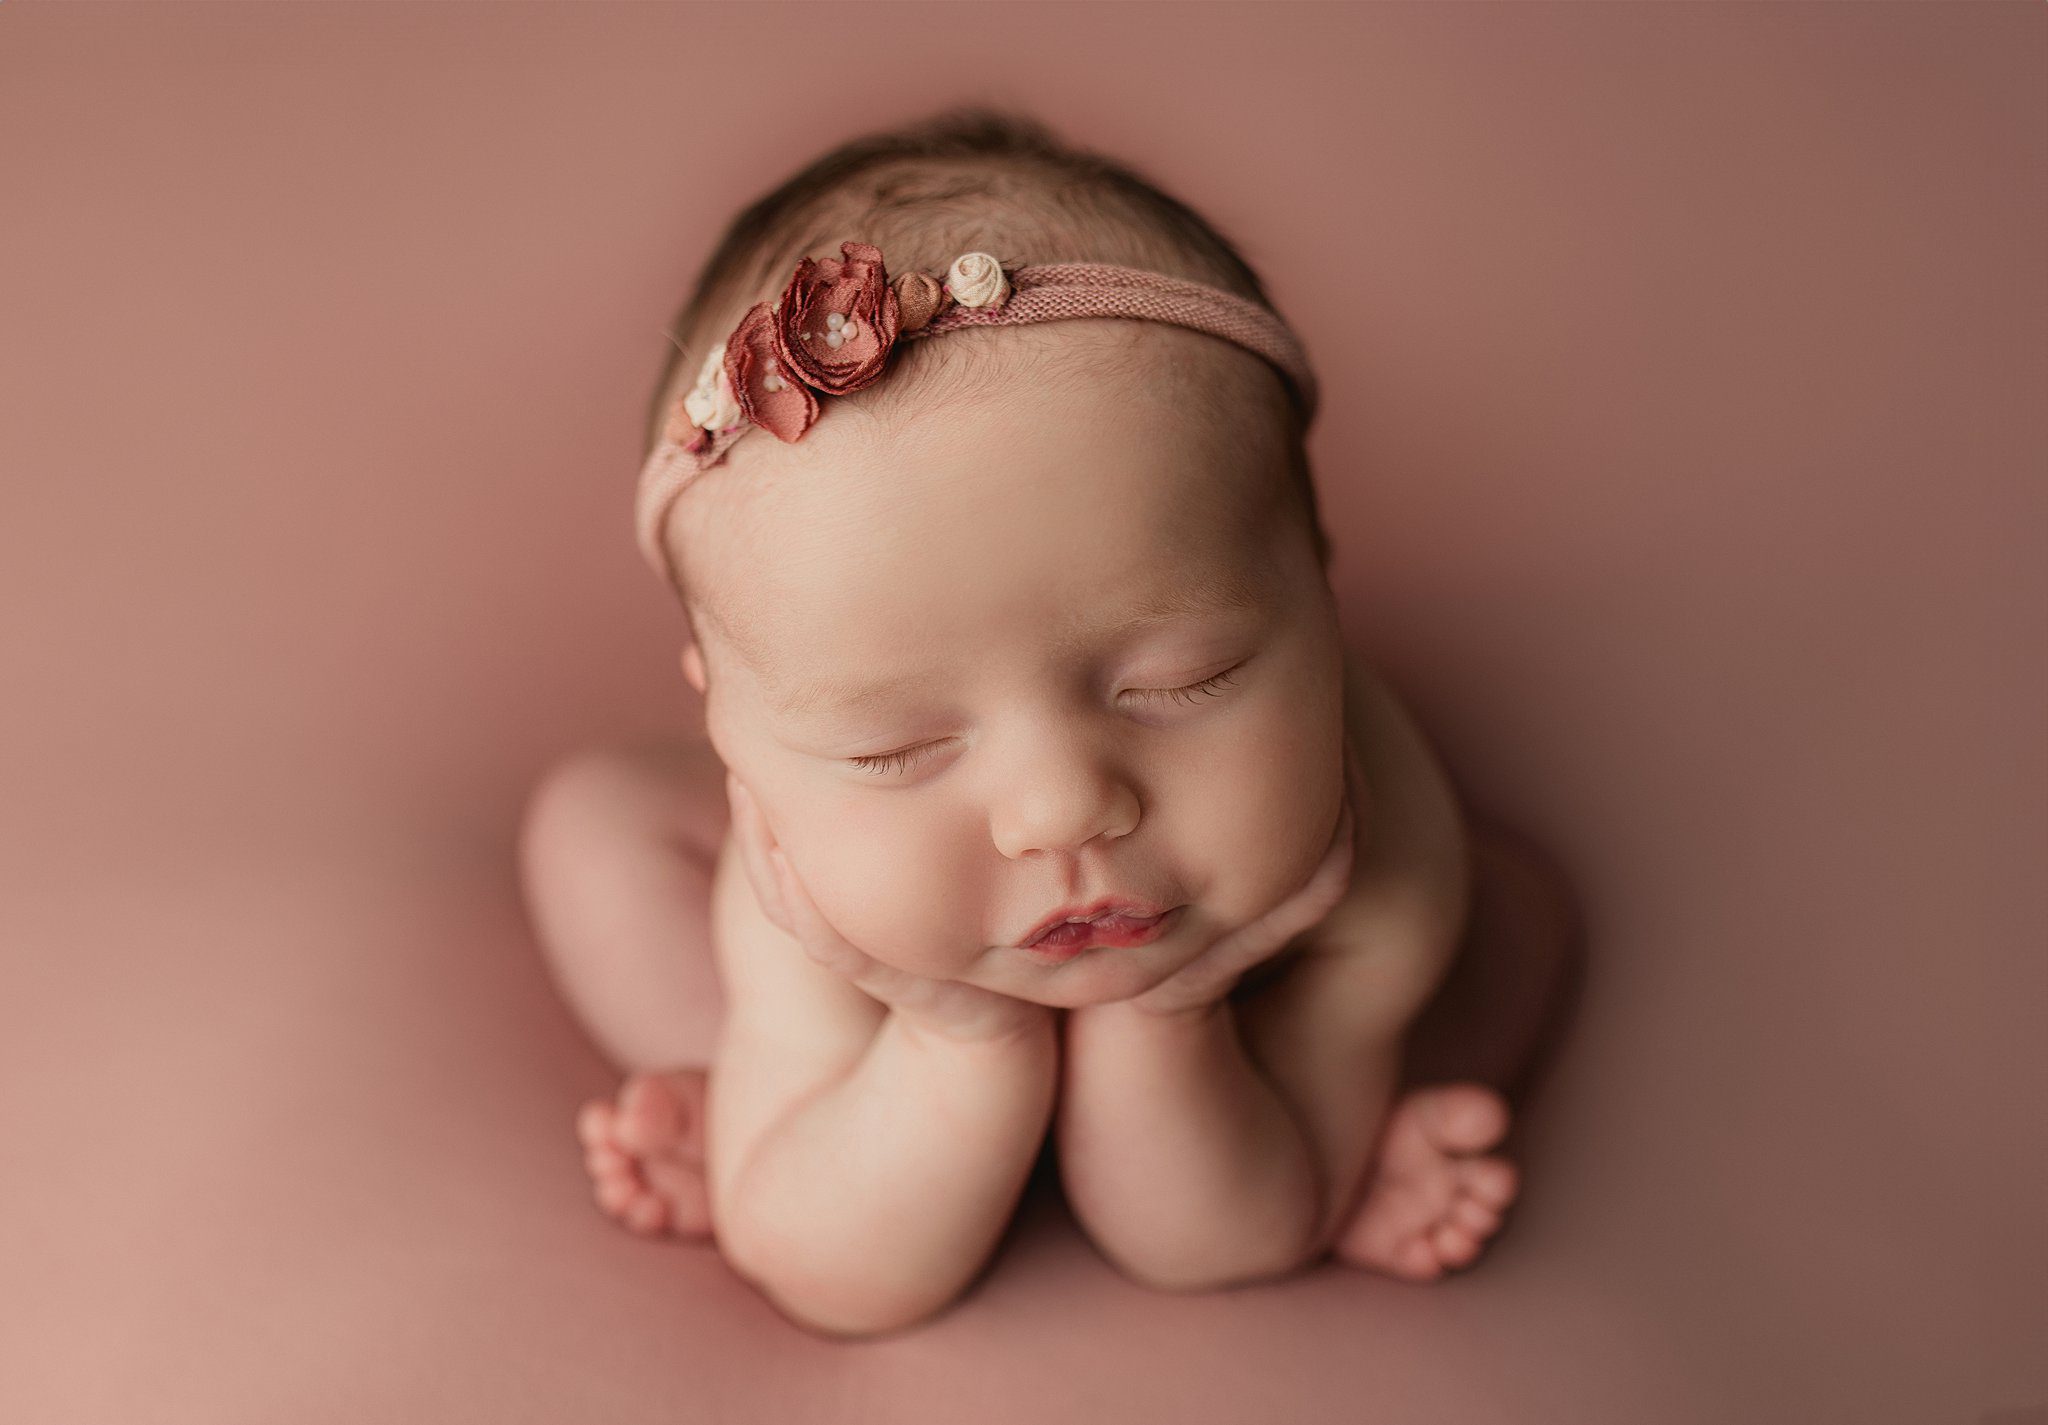 A newborn baby sleeps in a light red floral headband while resting her head in her hands thanks to orange county birth center